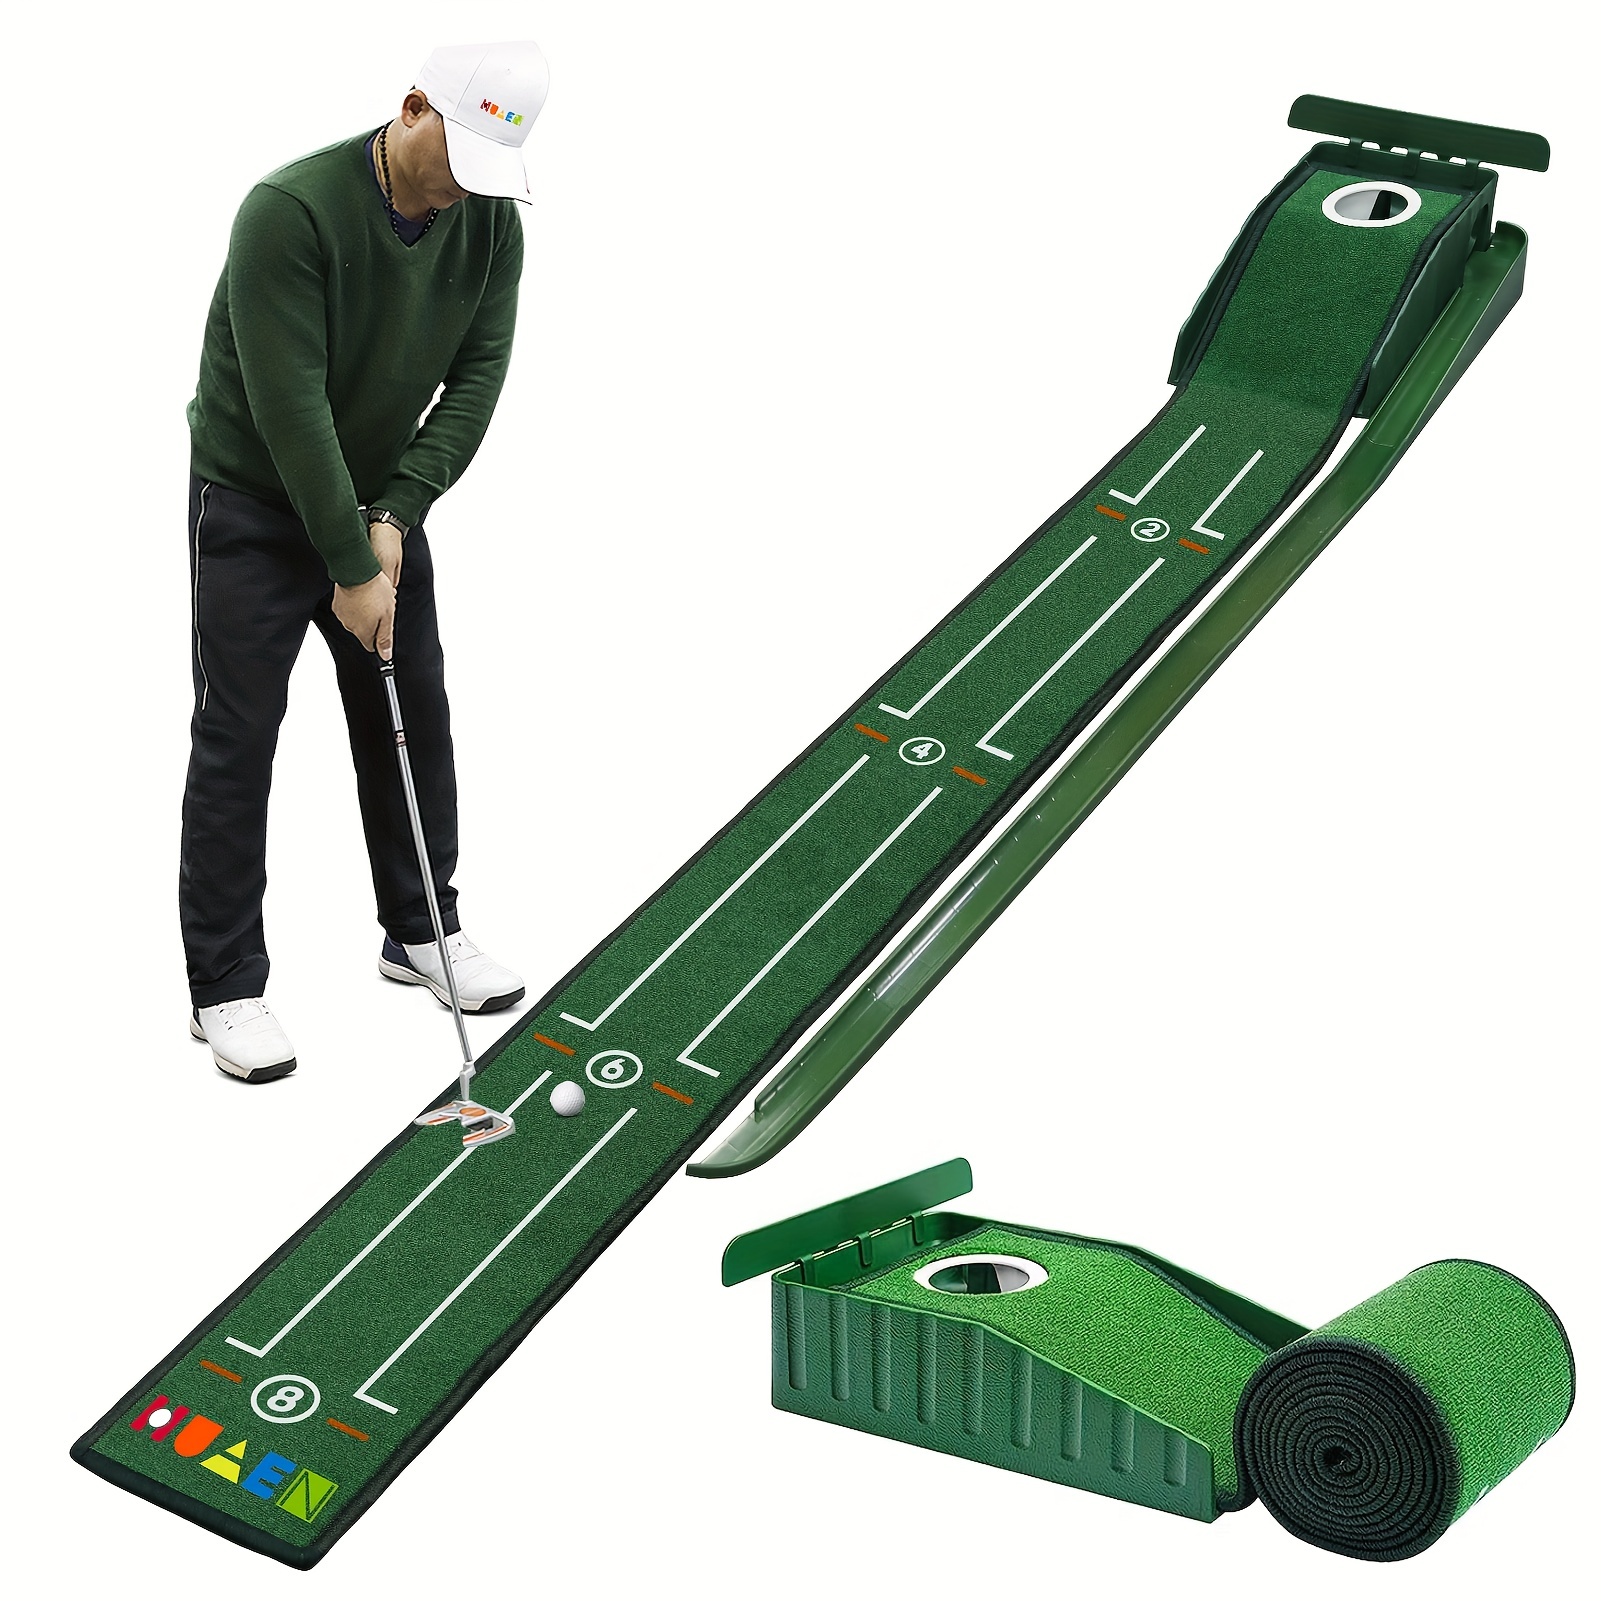 portable golf putting training matt for indoors and outdoor 8ft putting green with alignment guides compact edition golf accessories details 9